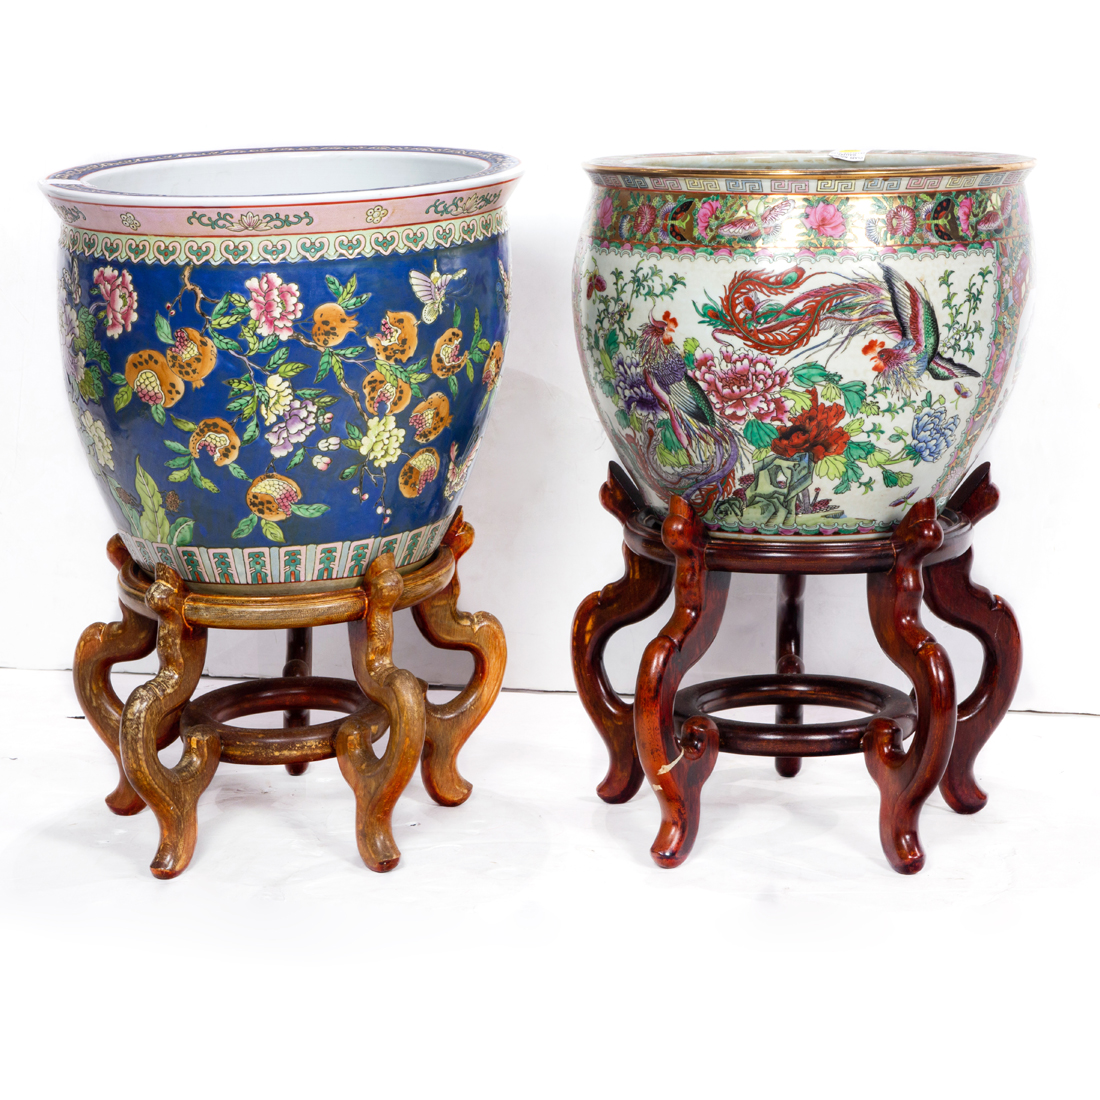 TWO CHINESE FAMILLE ROSE FISH BOWLS 2d2e27